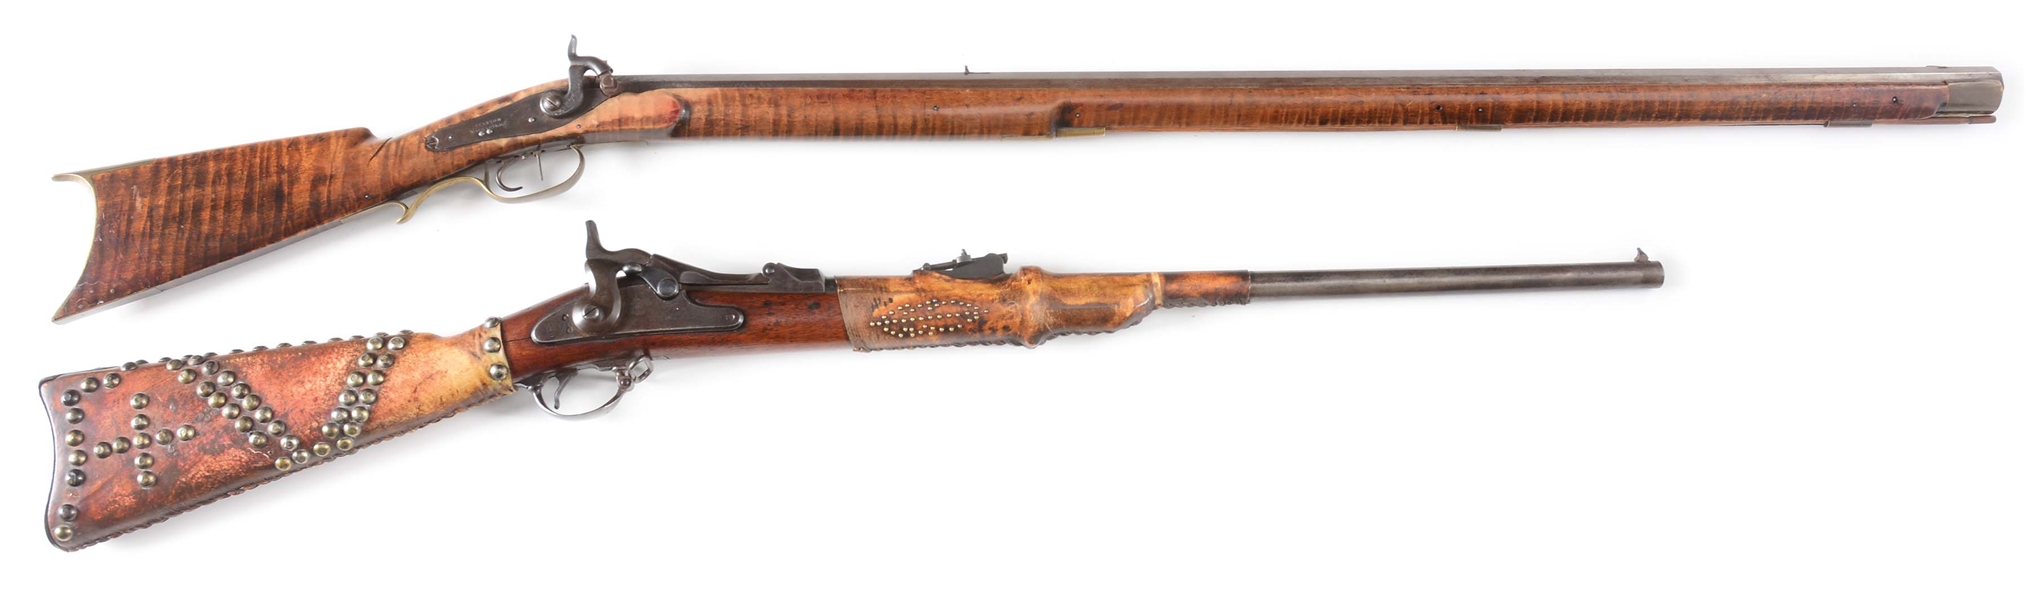 (A) LOT OF TWO: E. MORTER OHIO RIFLE WITH INDIAN DECORATED 1873 SPRINGFIELD.